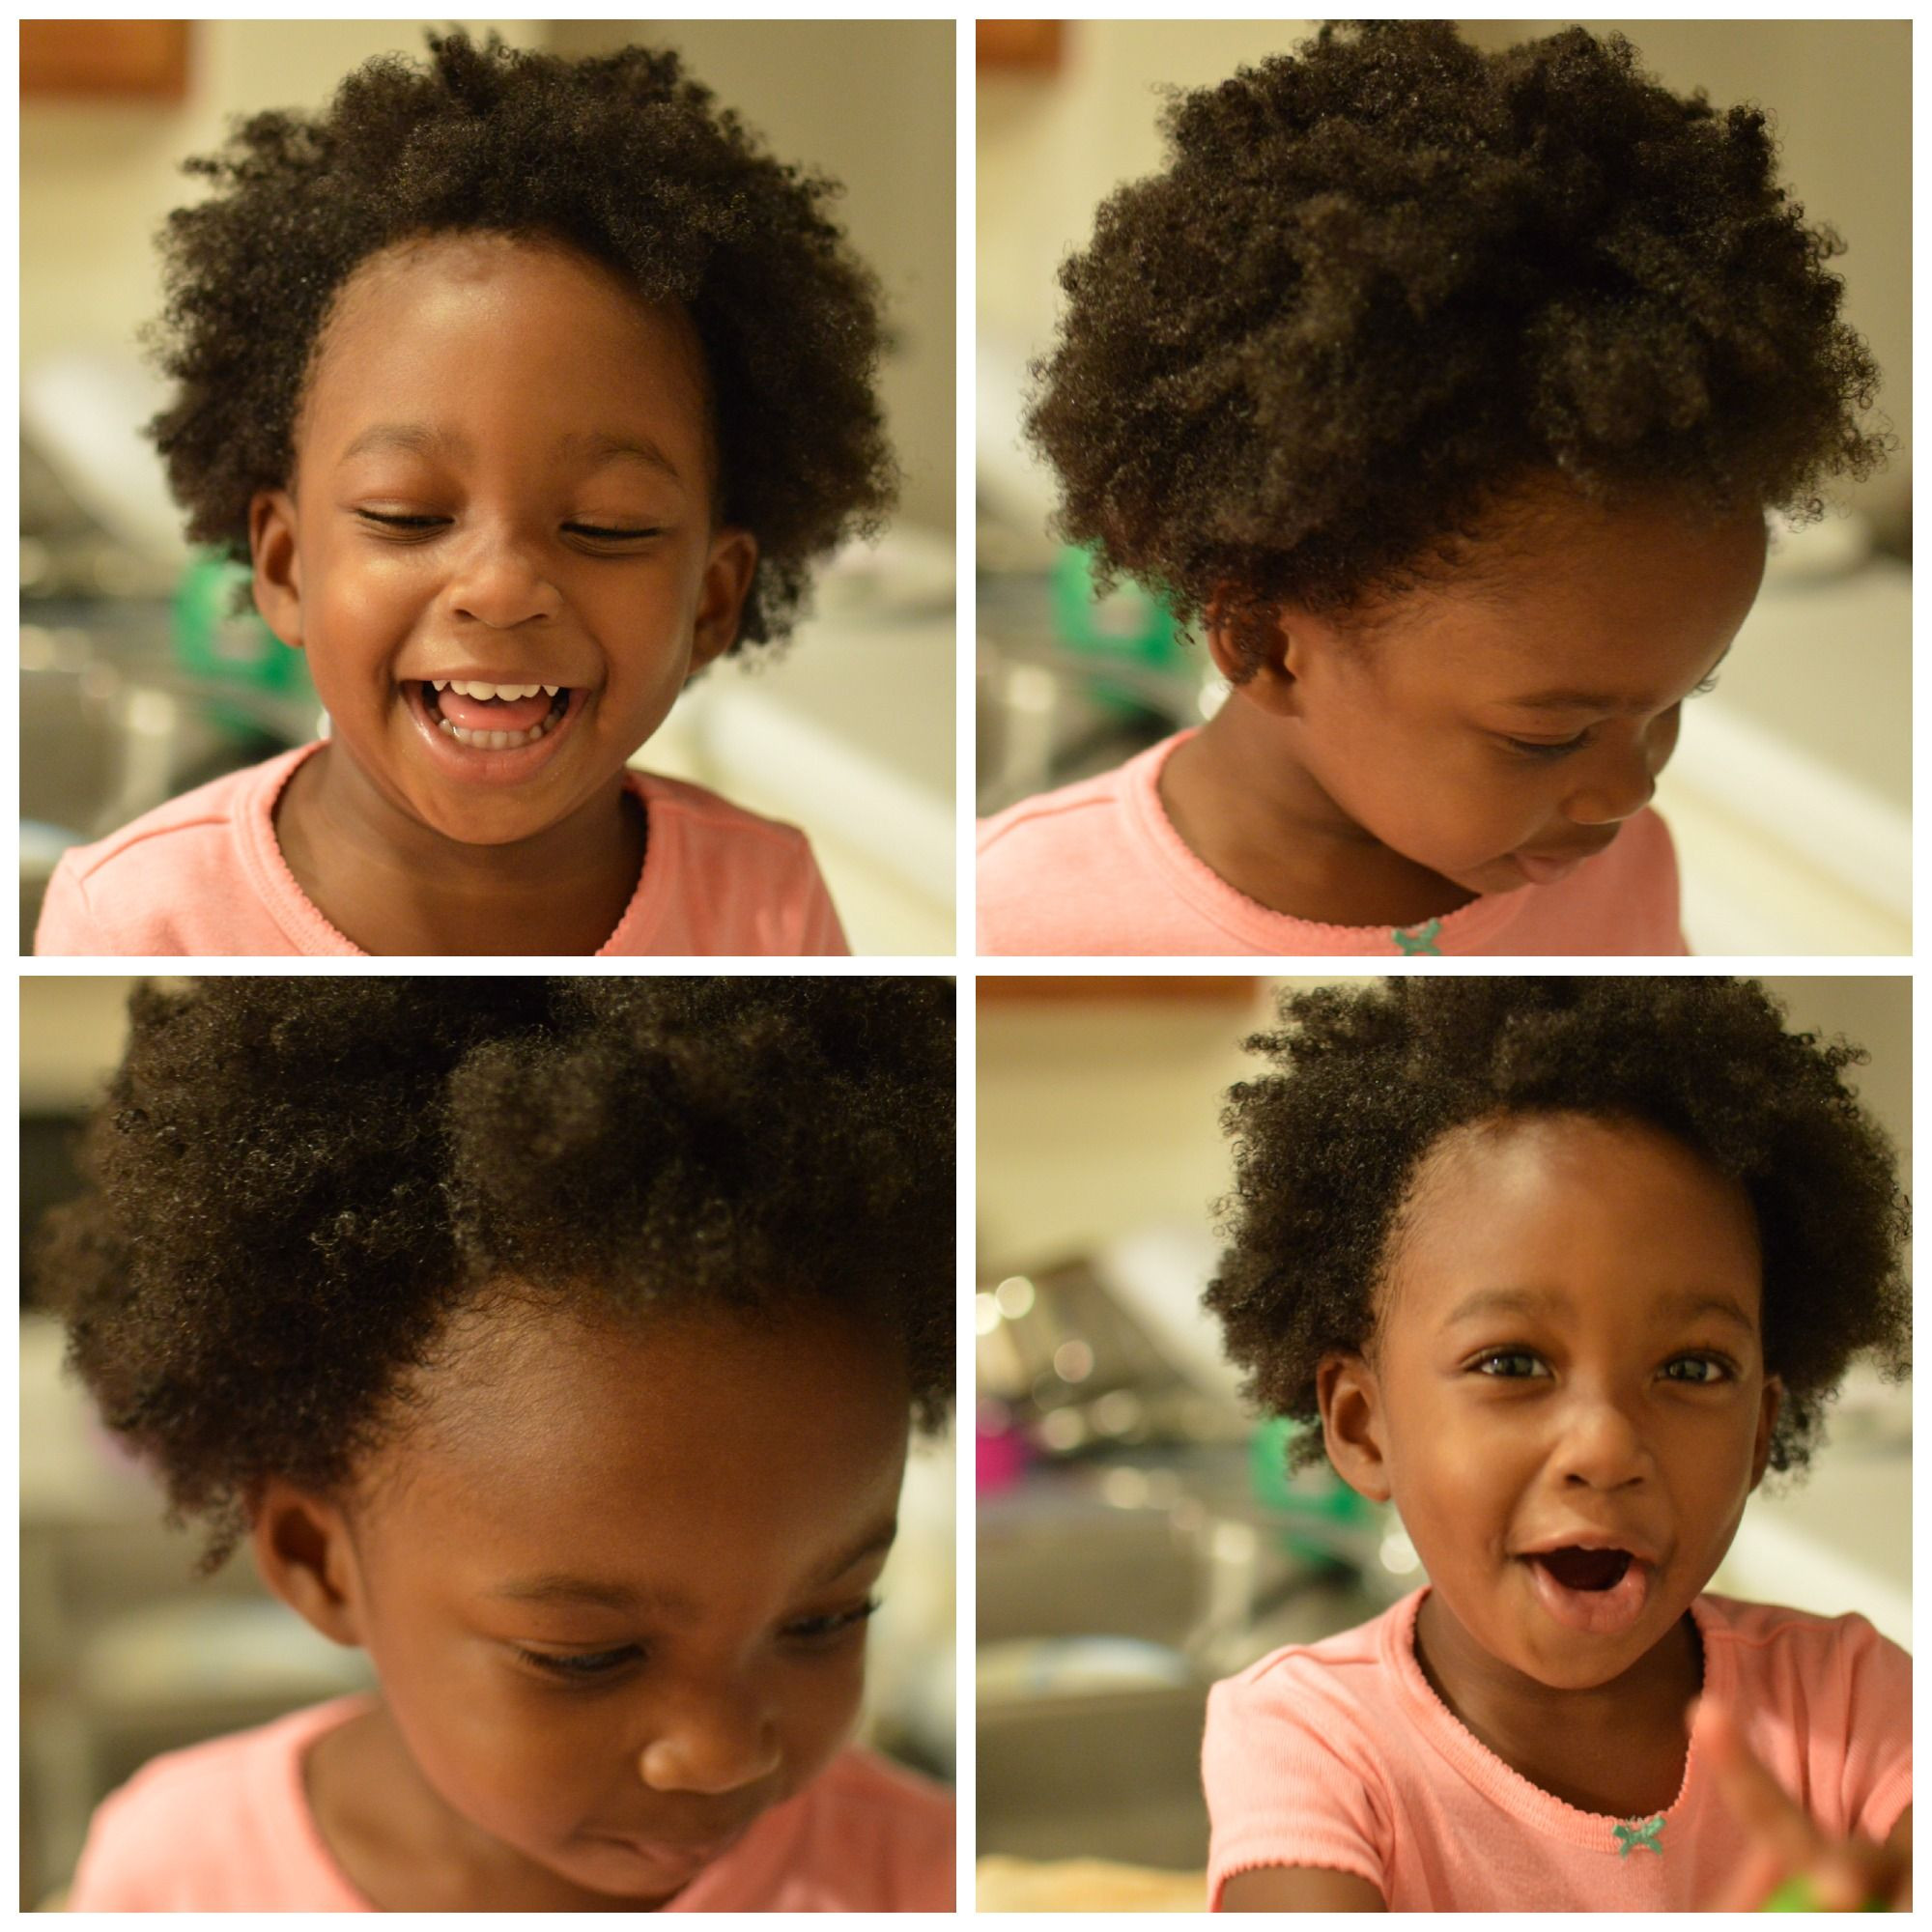 African American Baby Hair Care
 Discussing the hair care regimen of an African American